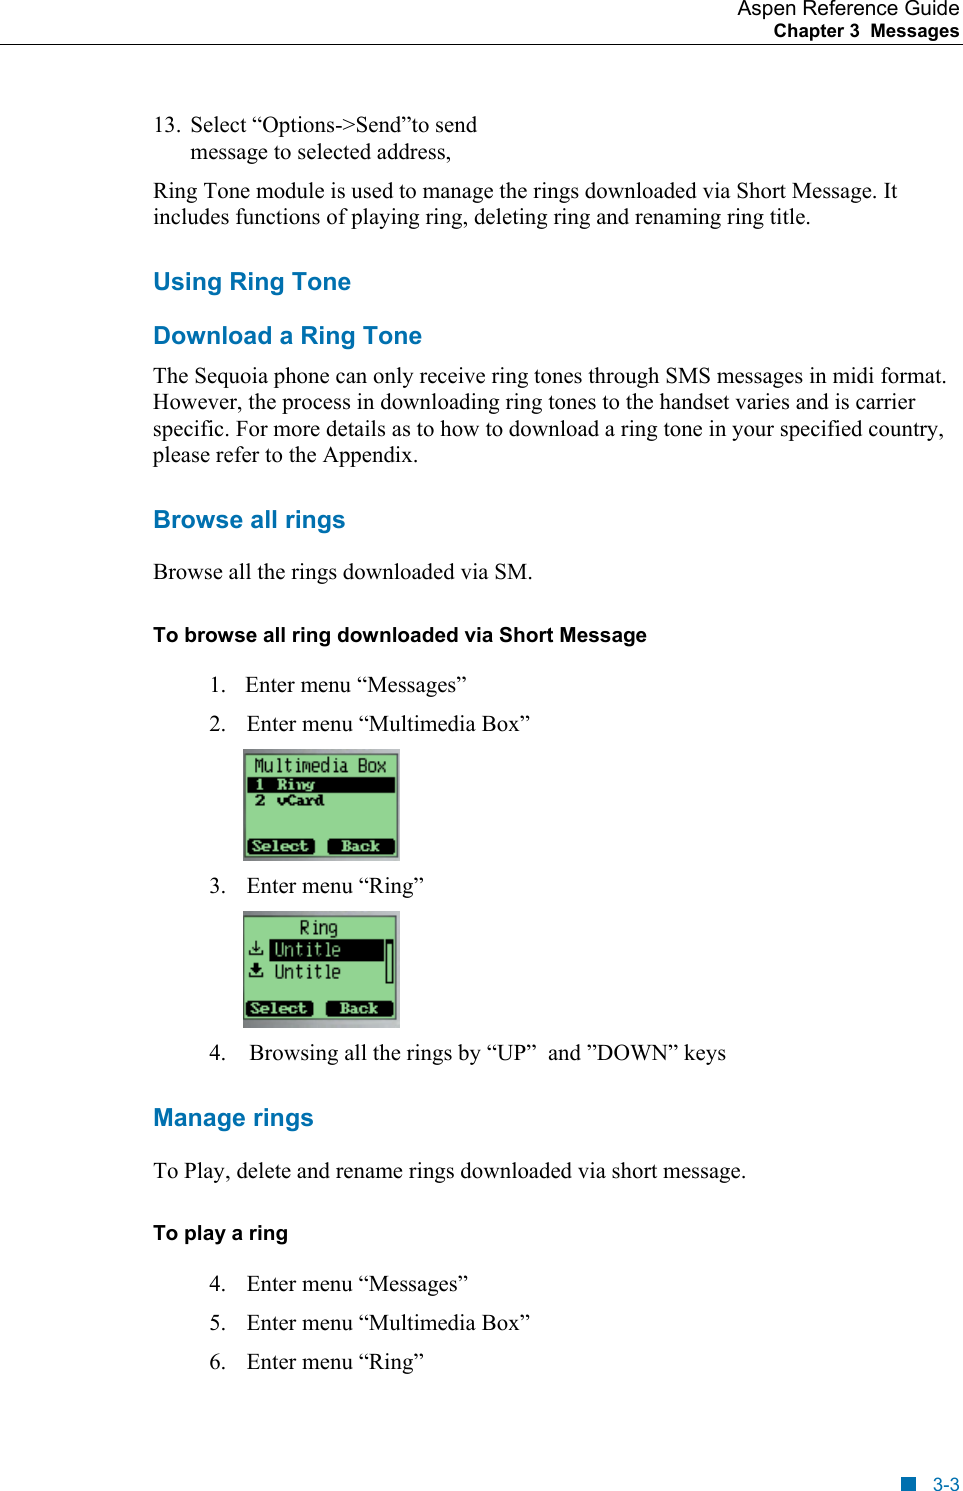 Aspen Reference Guide Chapter 3  Messages    13.  Select “Options-&gt;Send”to send message to selected address, Ring Tone module is used to manage the rings downloaded via Short Message. It includes functions of playing ring, deleting ring and renaming ring title. Using Ring Tone Download a Ring Tone The Sequoia phone can only receive ring tones through SMS messages in midi format. However, the process in downloading ring tones to the handset varies and is carrier specific. For more details as to how to download a ring tone in your specified country, please refer to the Appendix. Browse all rings Browse all the rings downloaded via SM. To browse all ring downloaded via Short Message 1.    Enter menu “Messages” 2.  Enter menu “Multimedia Box”  3.  Enter menu “Ring”                                                           4.    Browsing all the rings by “UP”  and ”DOWN” keys    Manage rings To Play, delete and rename rings downloaded via short message. To play a ring  4.  Enter menu “Messages” 5.  Enter menu “Multimedia Box” 6.  Enter menu “Ring”     3-3 